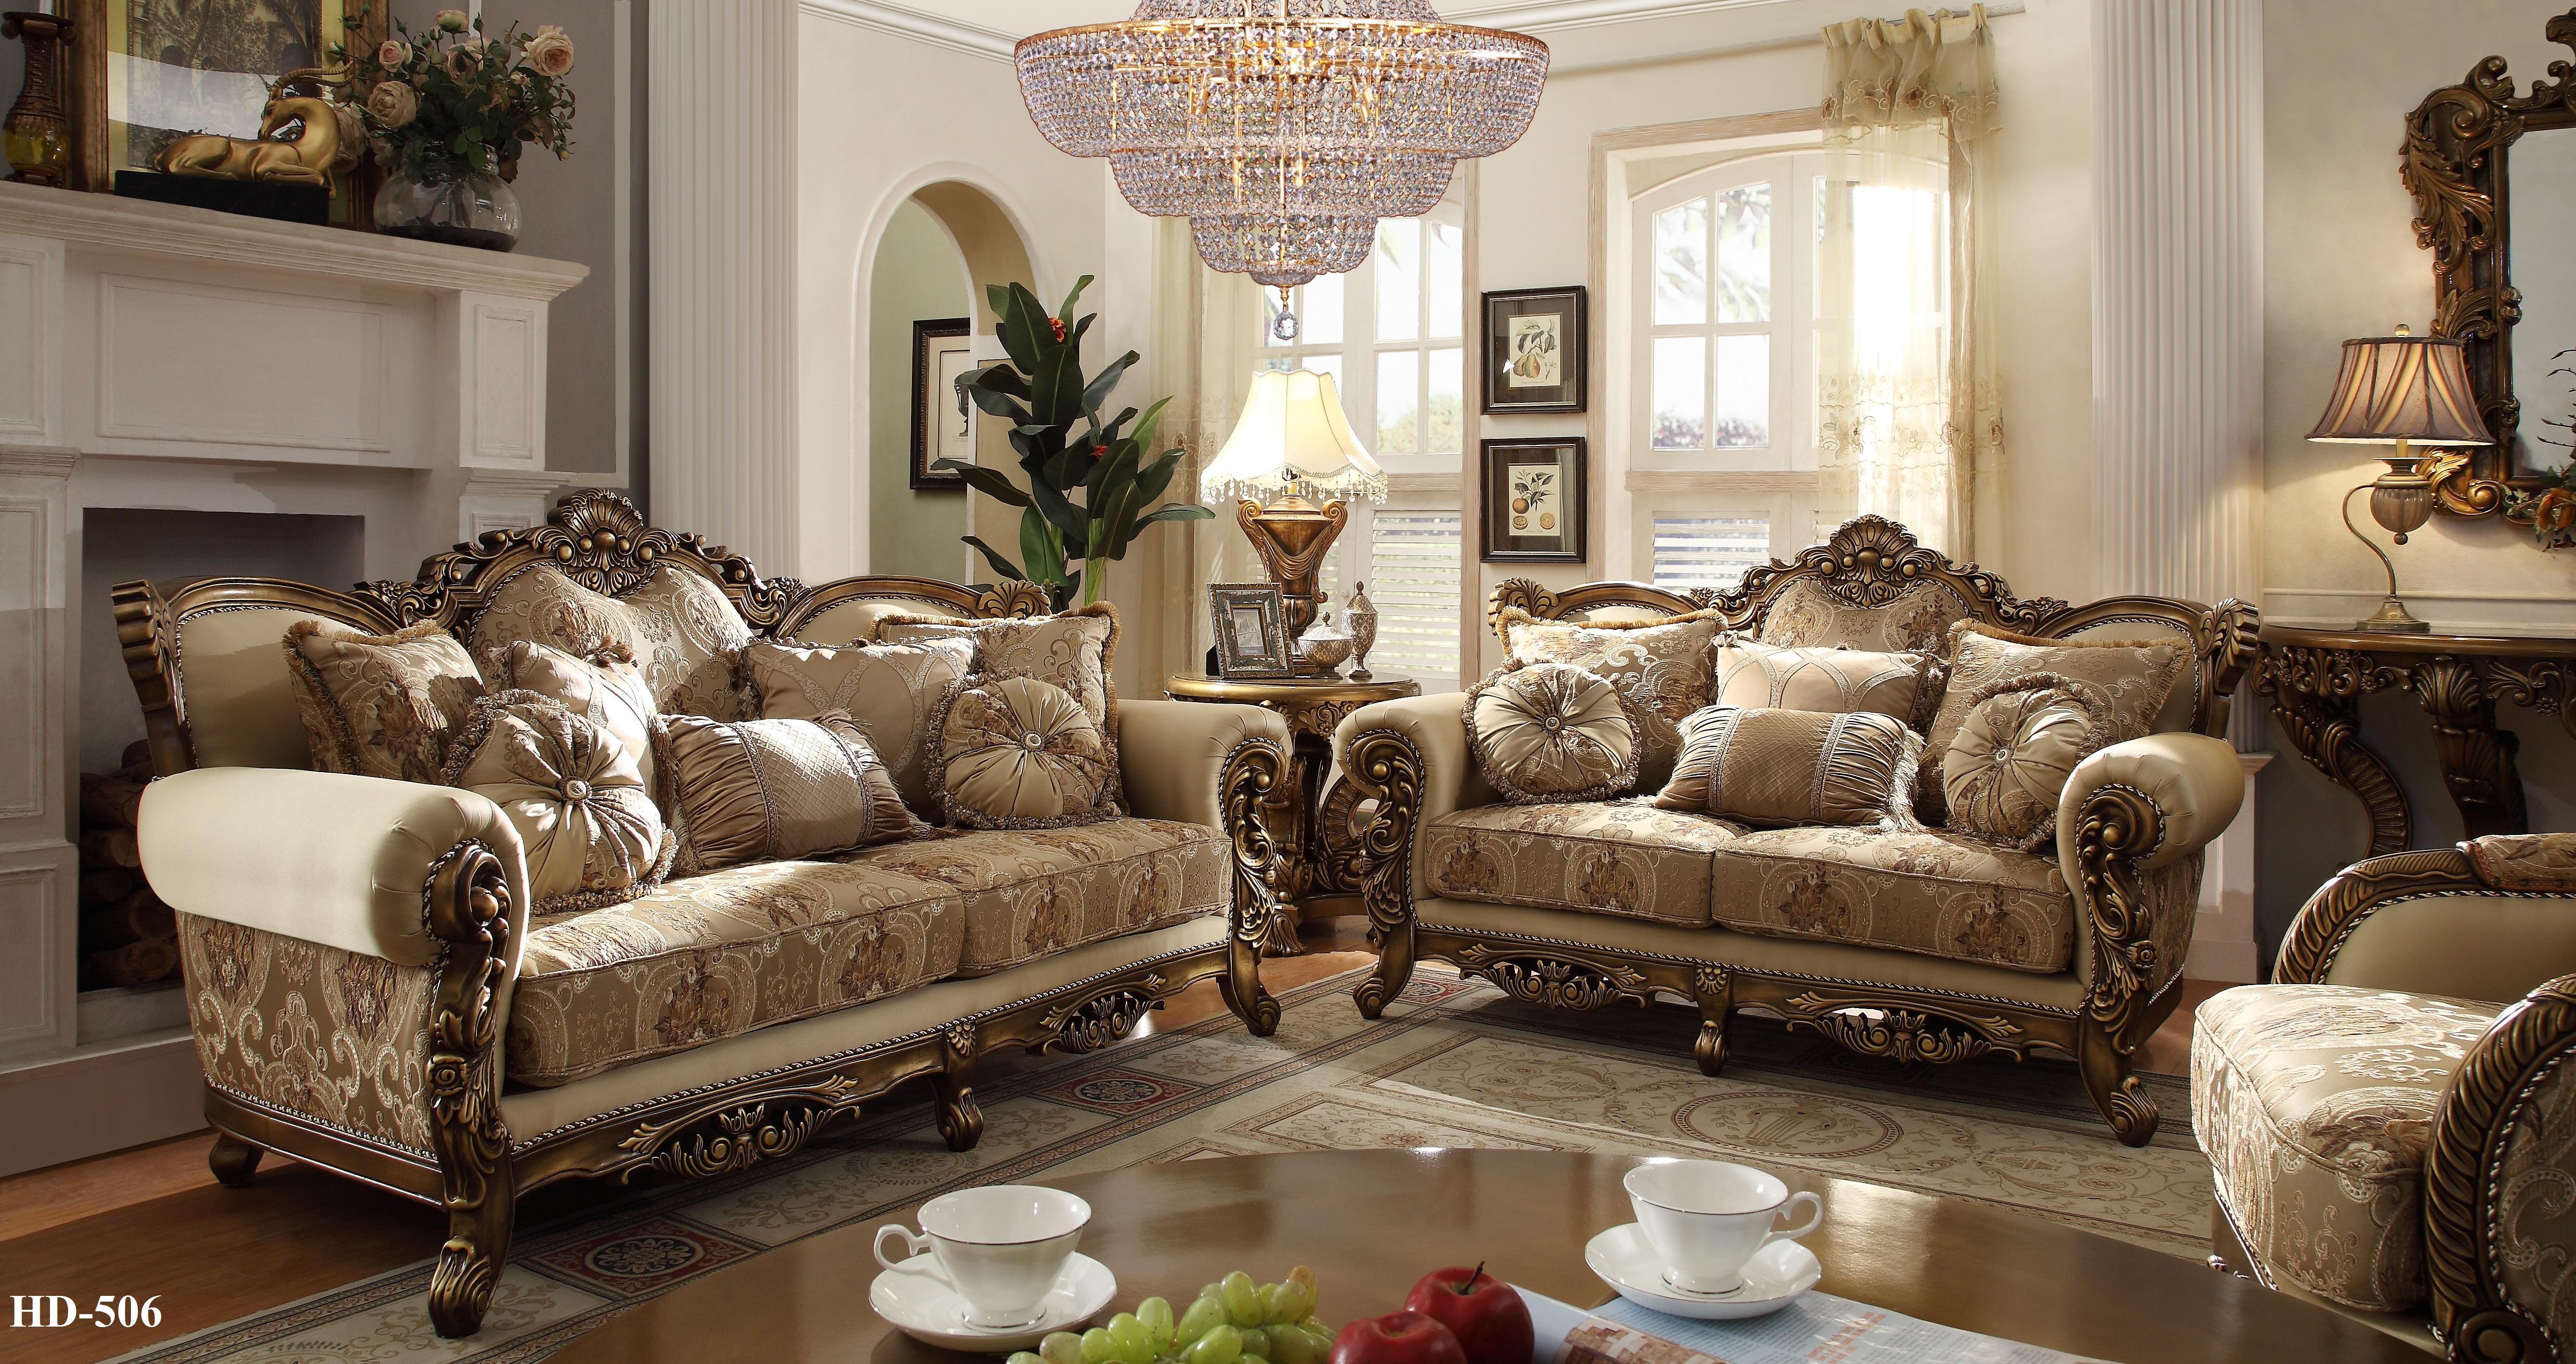 

    
Met Ant Gold & Perfect Brown Sofa Set 5Pcs w/End Tables Traditional Homey Design HD-506
